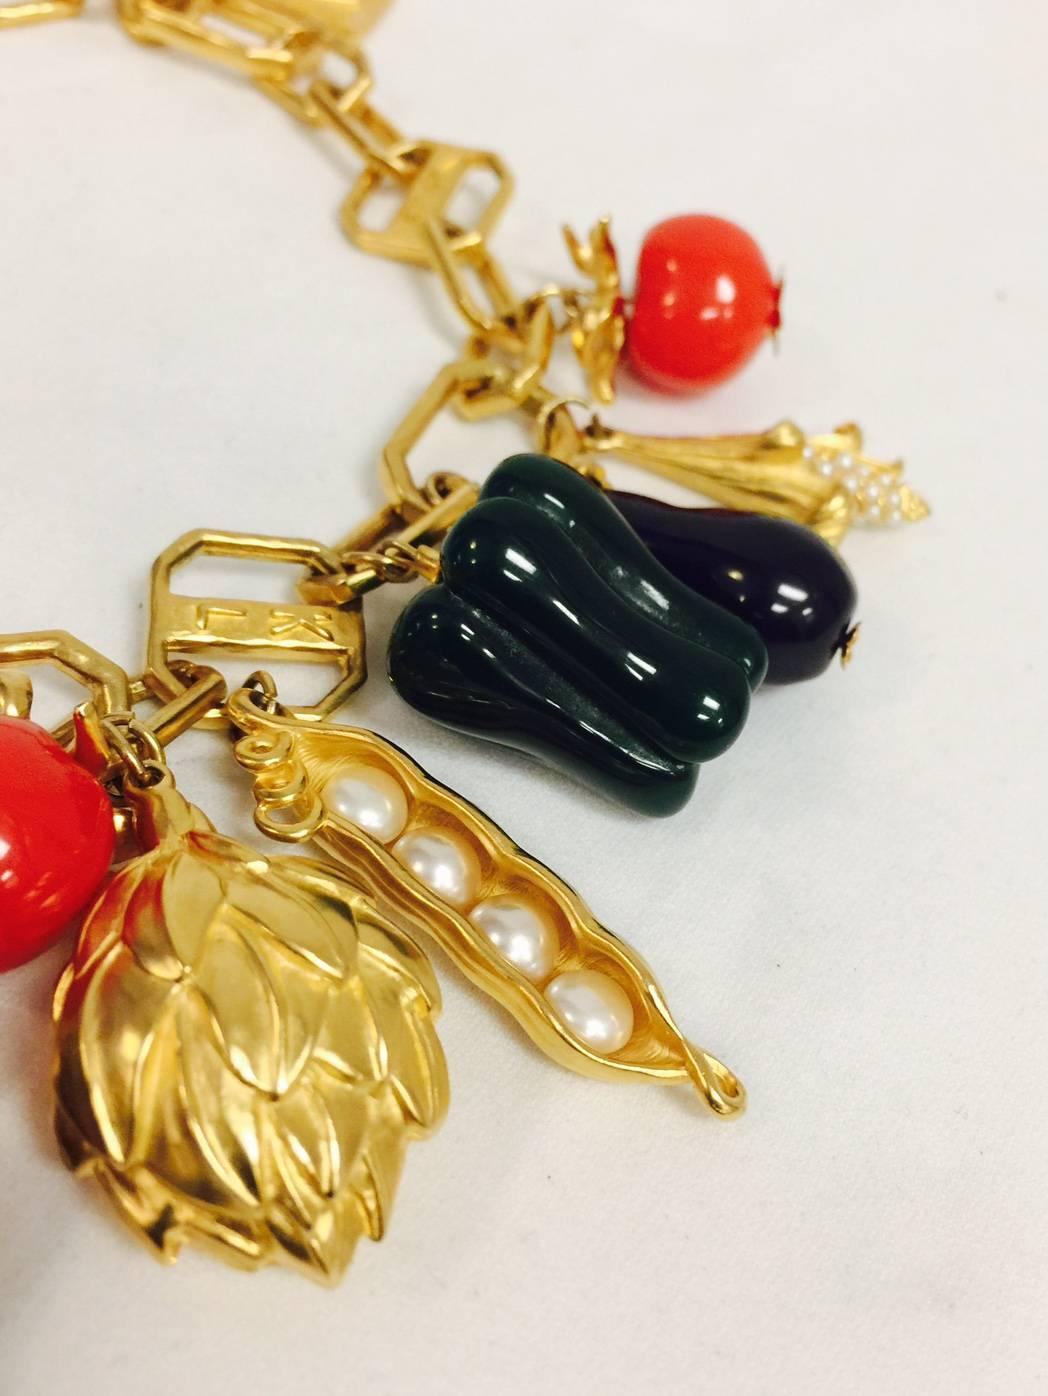 Impossible to find!  Karl dug up a fabulous, whimsical design with this beauty!  Fashioned in gold tone you will delight in green peppers, cherry tomatoes, beets, eggplants detailed to perfection in resin.  Gold tone peas and ears of corn are